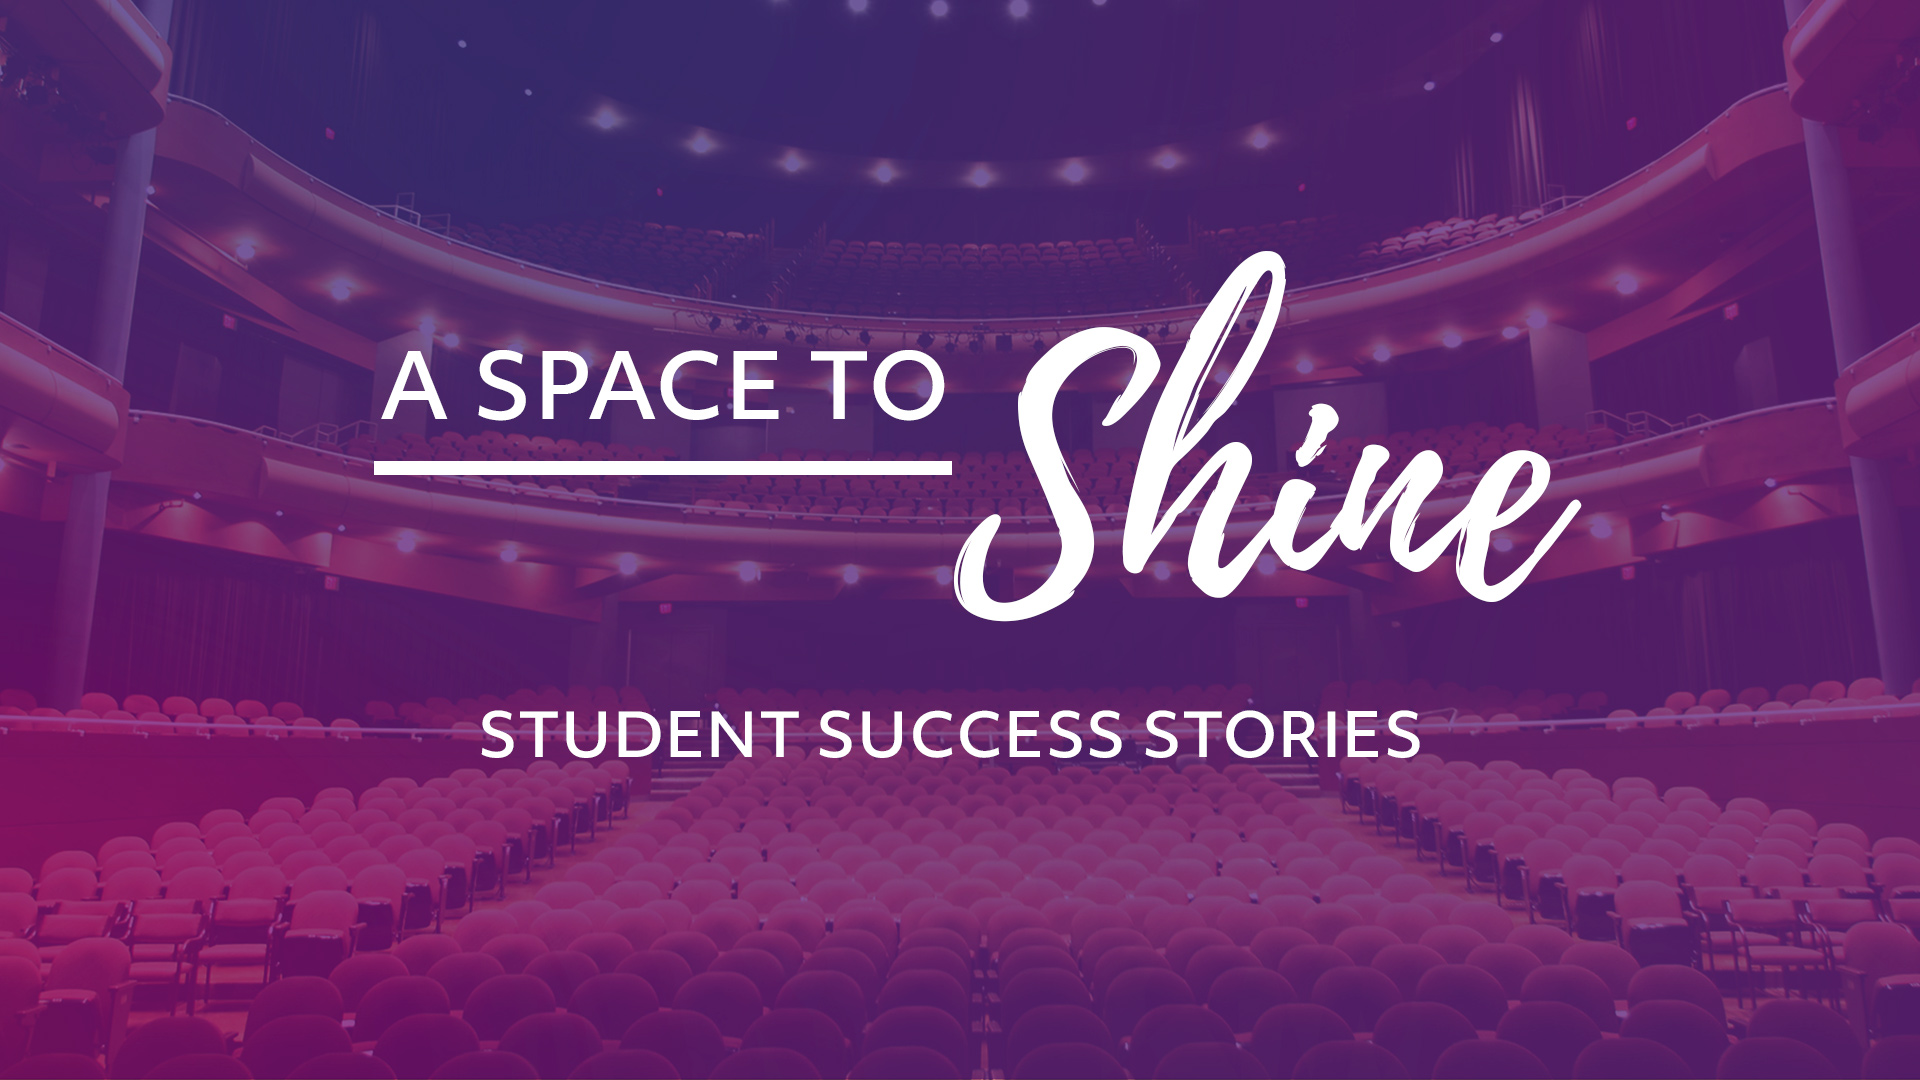 A Space to Shine - Student Success Stories